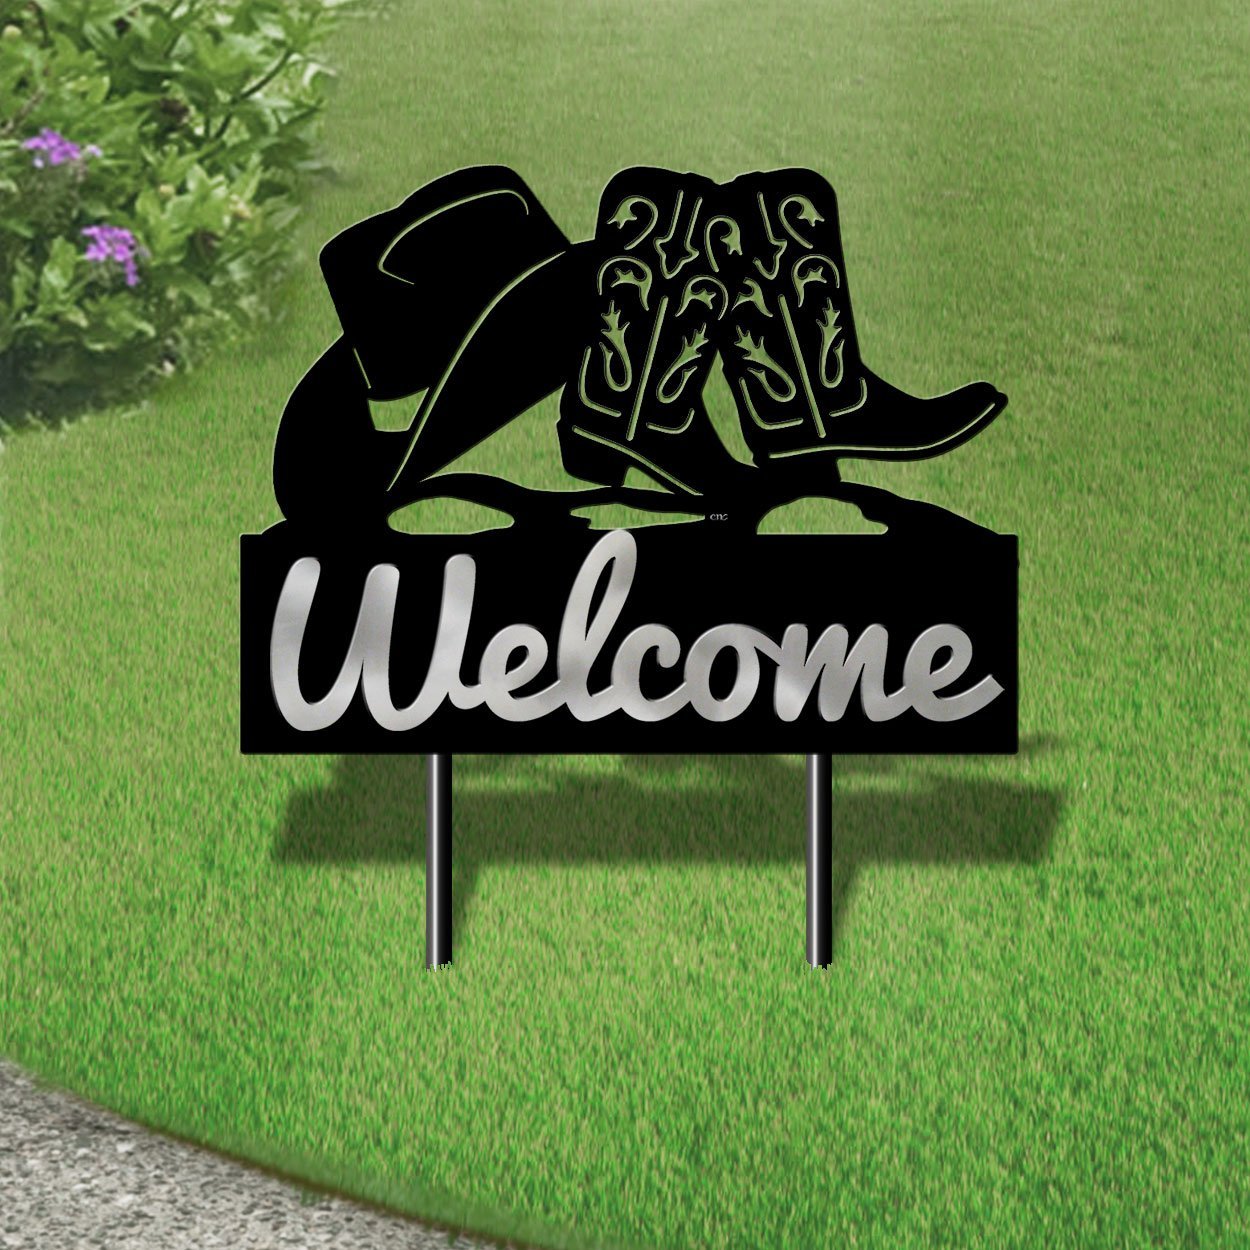 610038 - Large 25in Wide Cowboy Hat and Boots Design Horizontal Metal Welcome Yard Sign